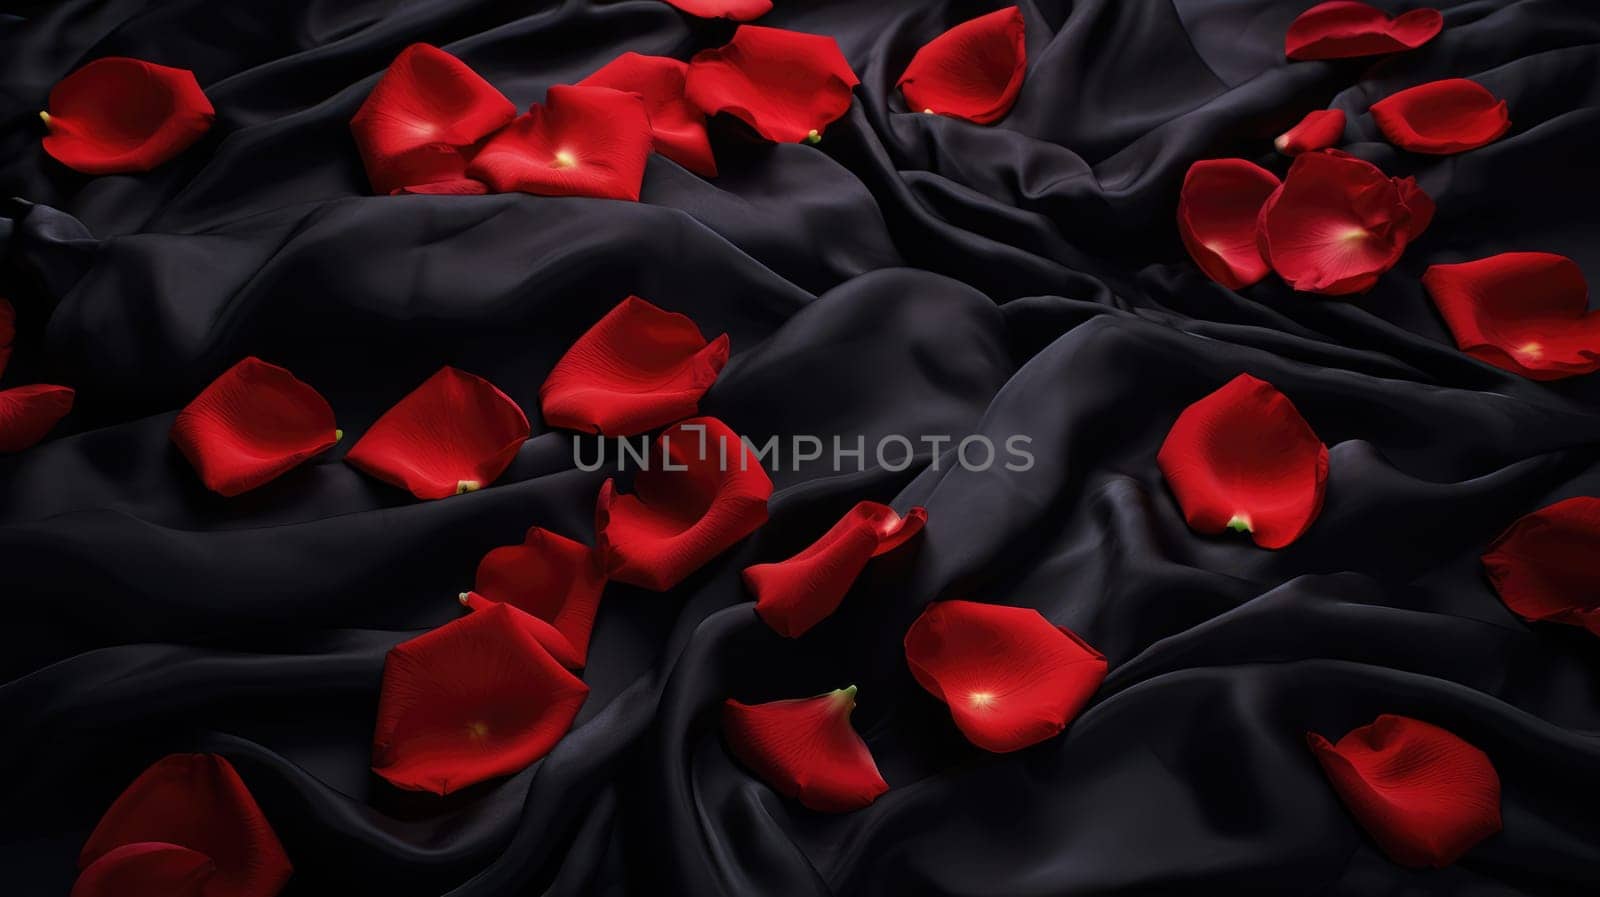 Rose rose petals scattered over black silk satin bed sheets. Romantic visual. AI